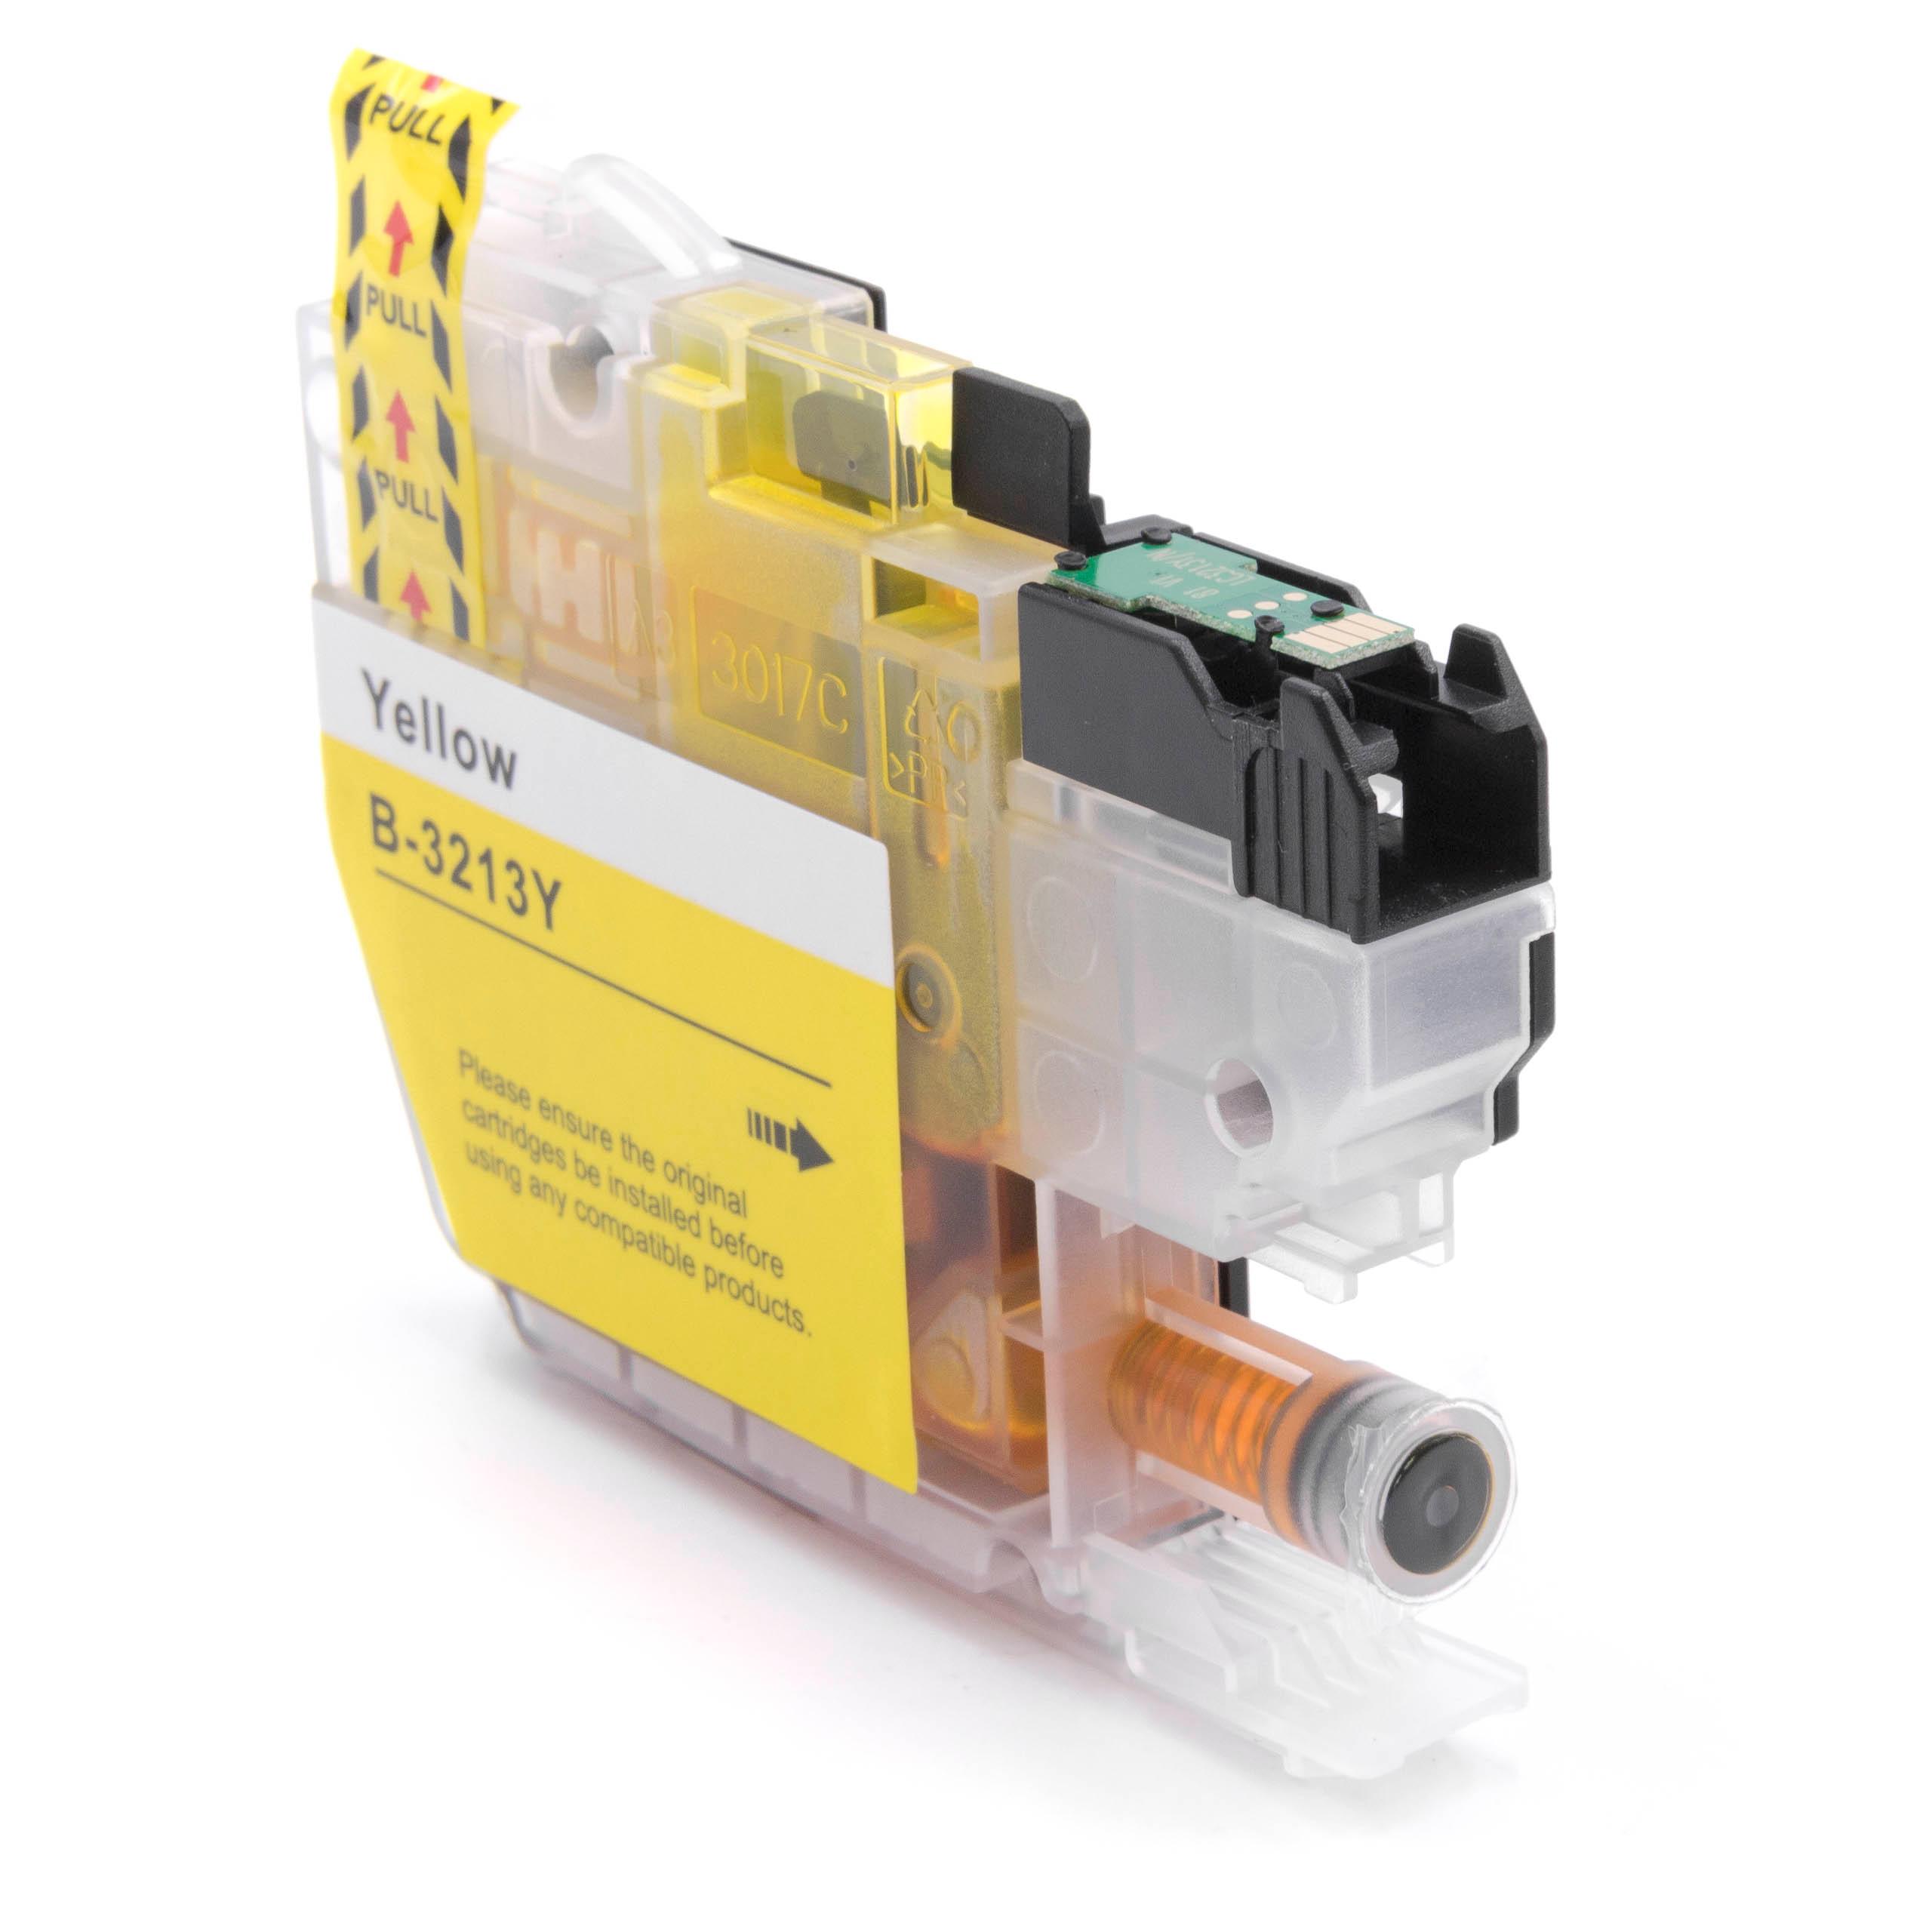 Ink Cartridge as Exchange for Brother LC3213Y, LC-3213Y for Brother Printer - Yellow 7 ml + Chip